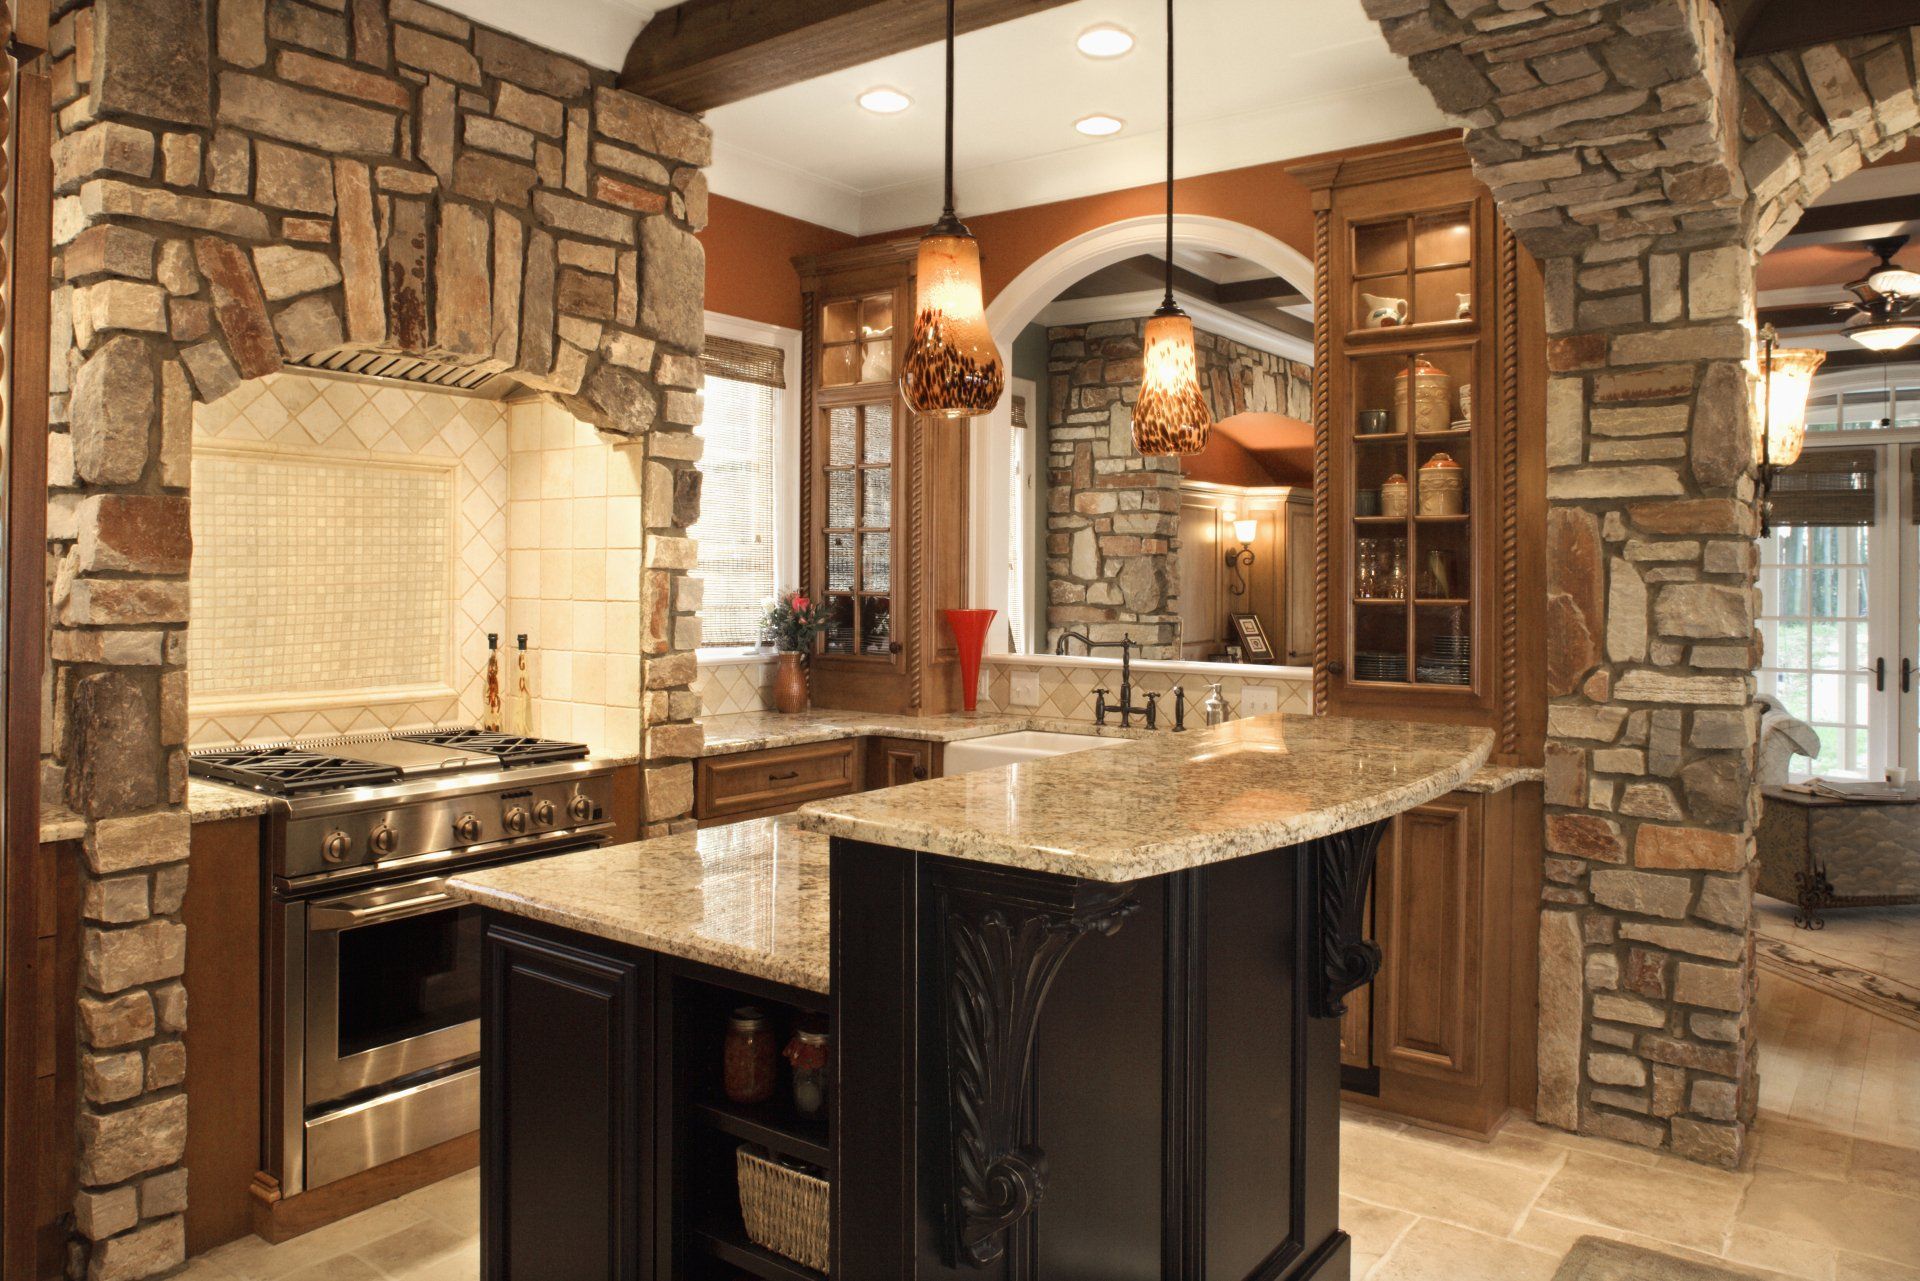 Luxurious kitchen with stone finish and stainless steel appliances